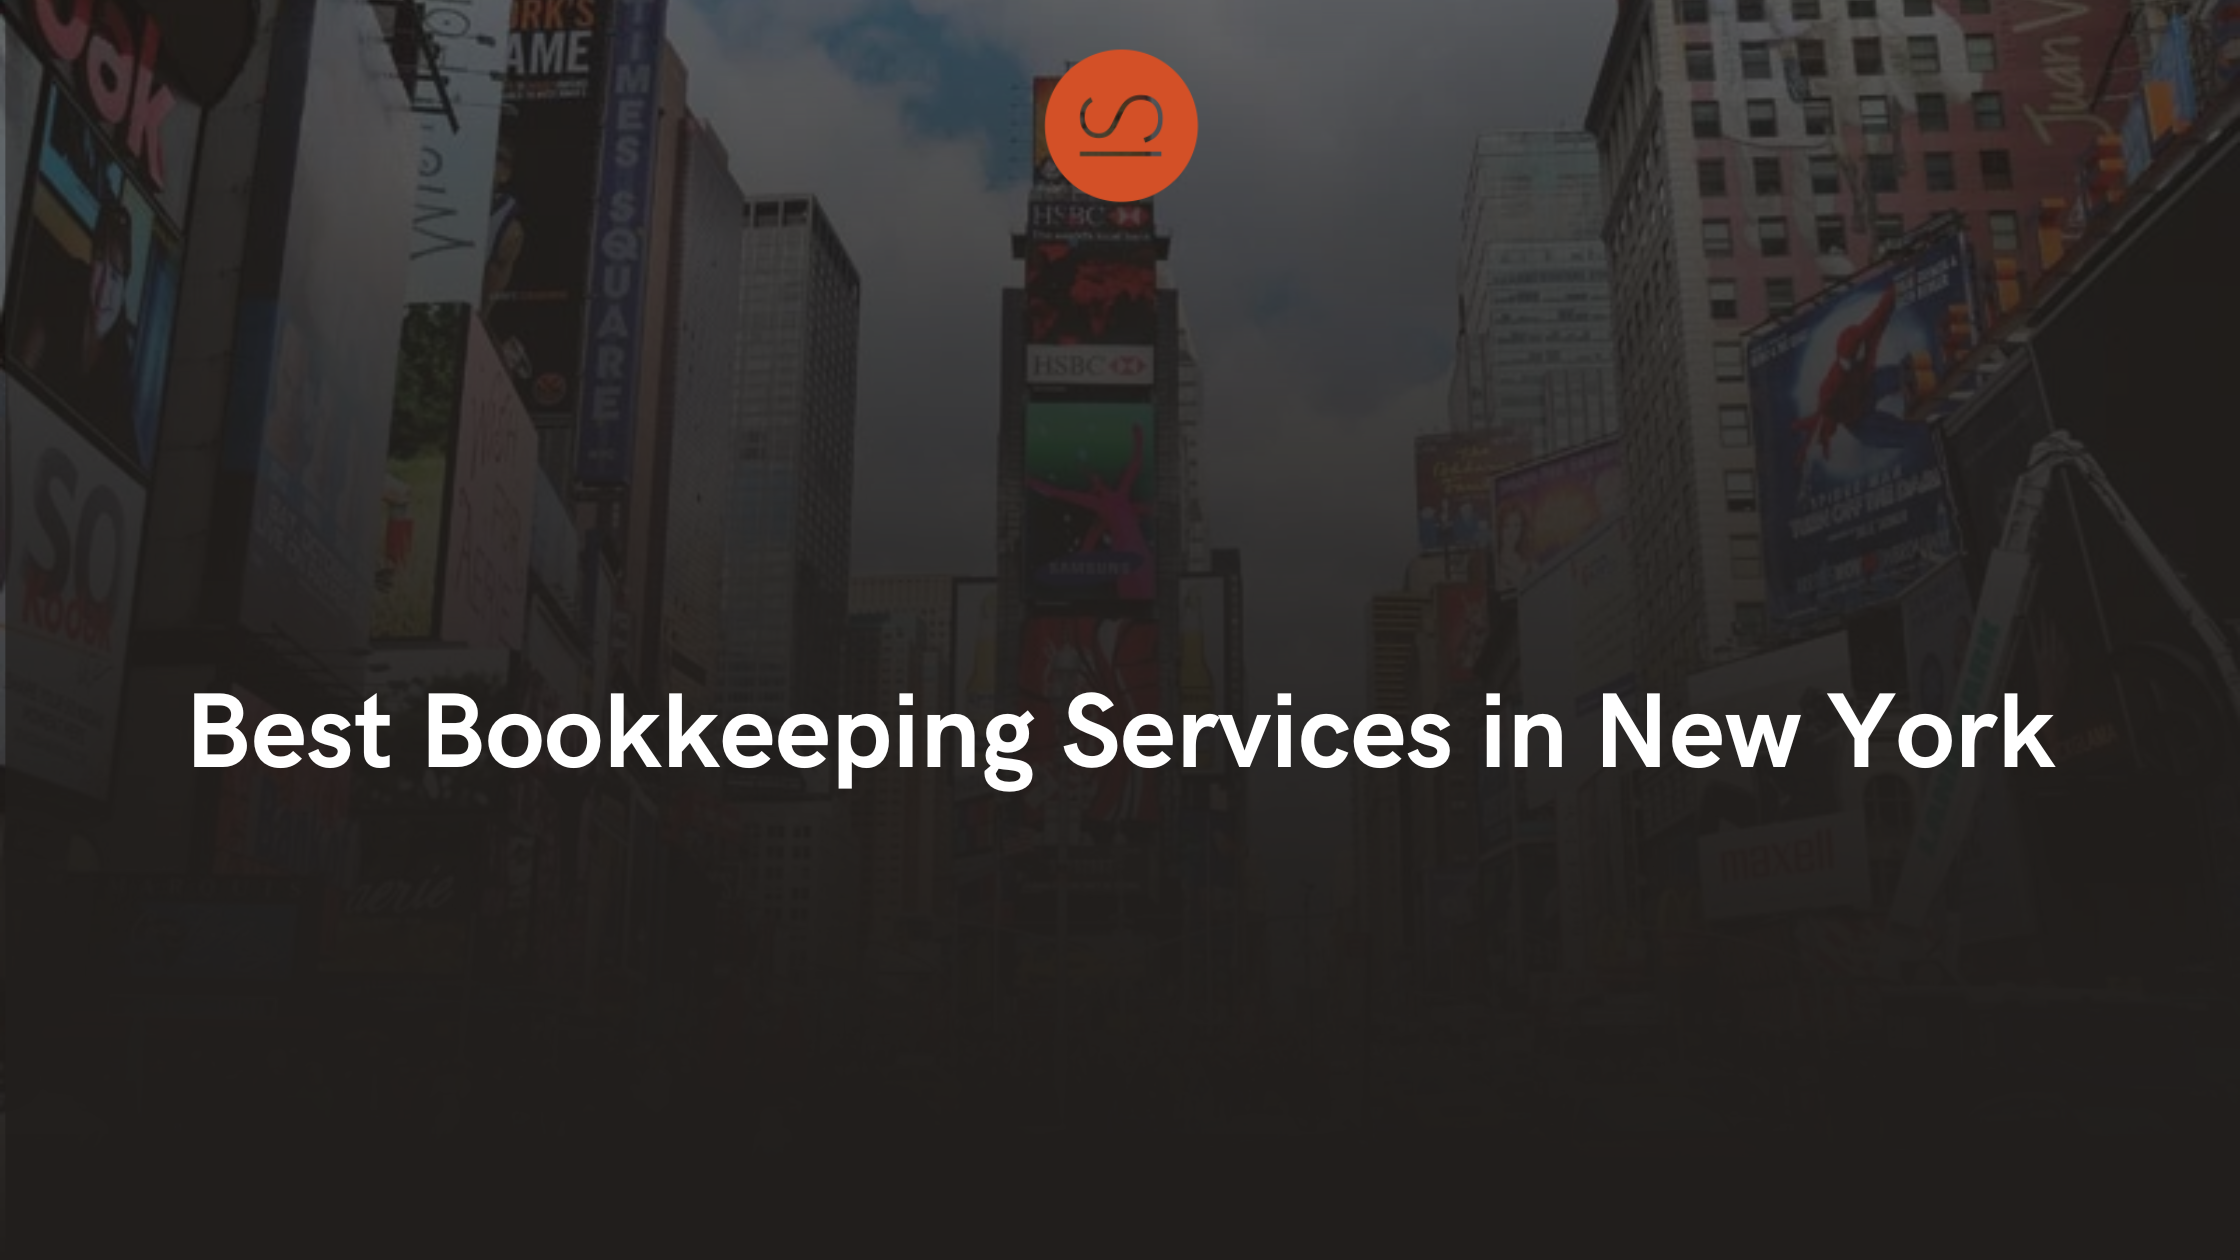 Best Bookkeeping Services in New York